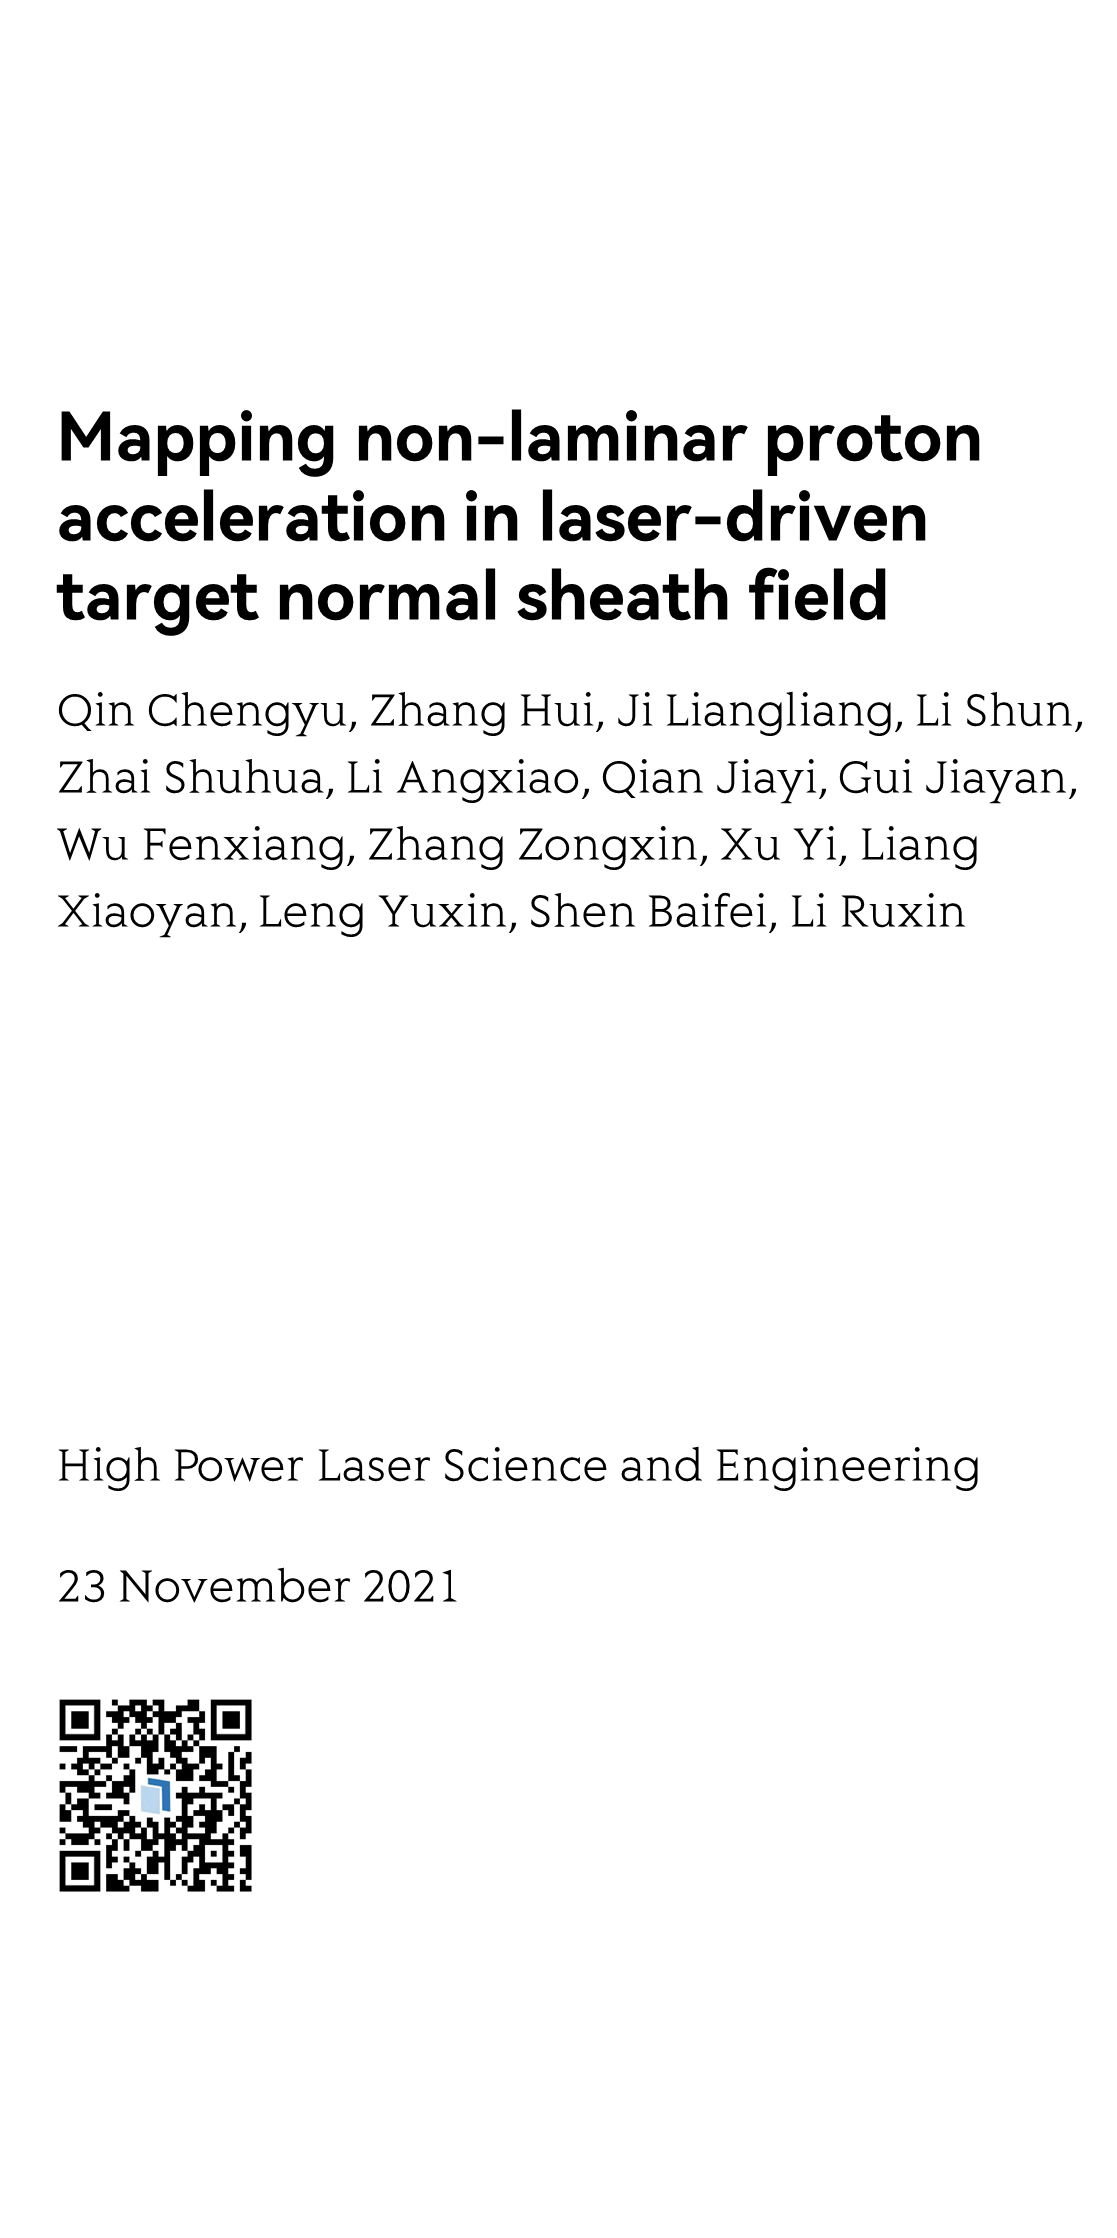 Mapping non-laminar proton acceleration in laser-driven target normal sheath field_1